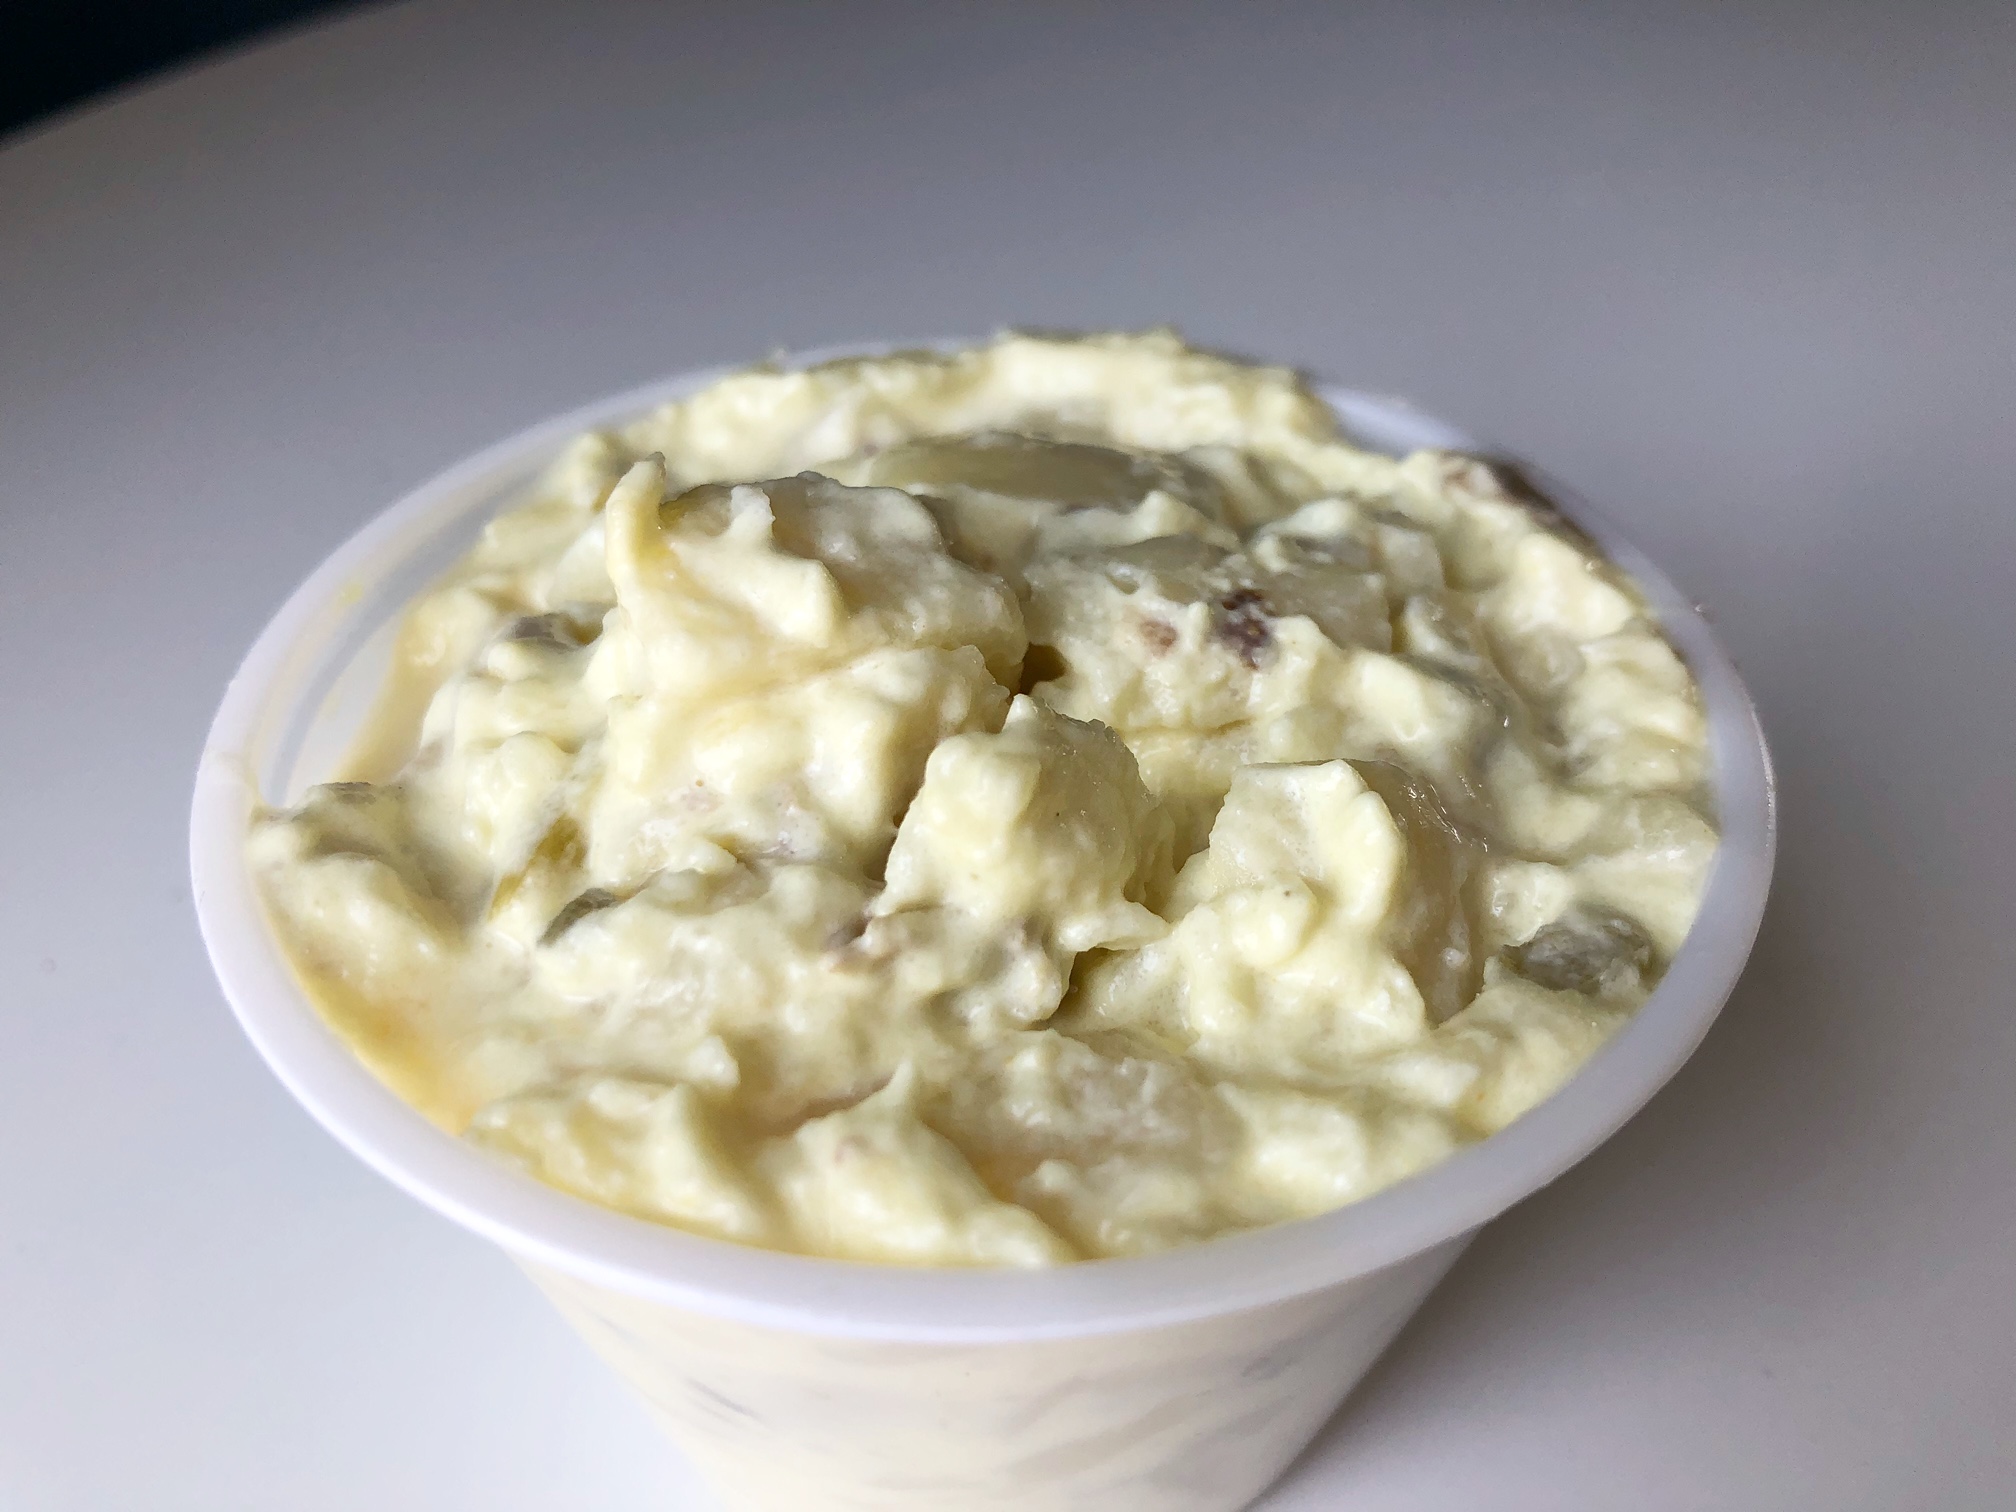 On a white table, there is a small side cup of yellow potato salad. Photo by Alyssa Buckley.